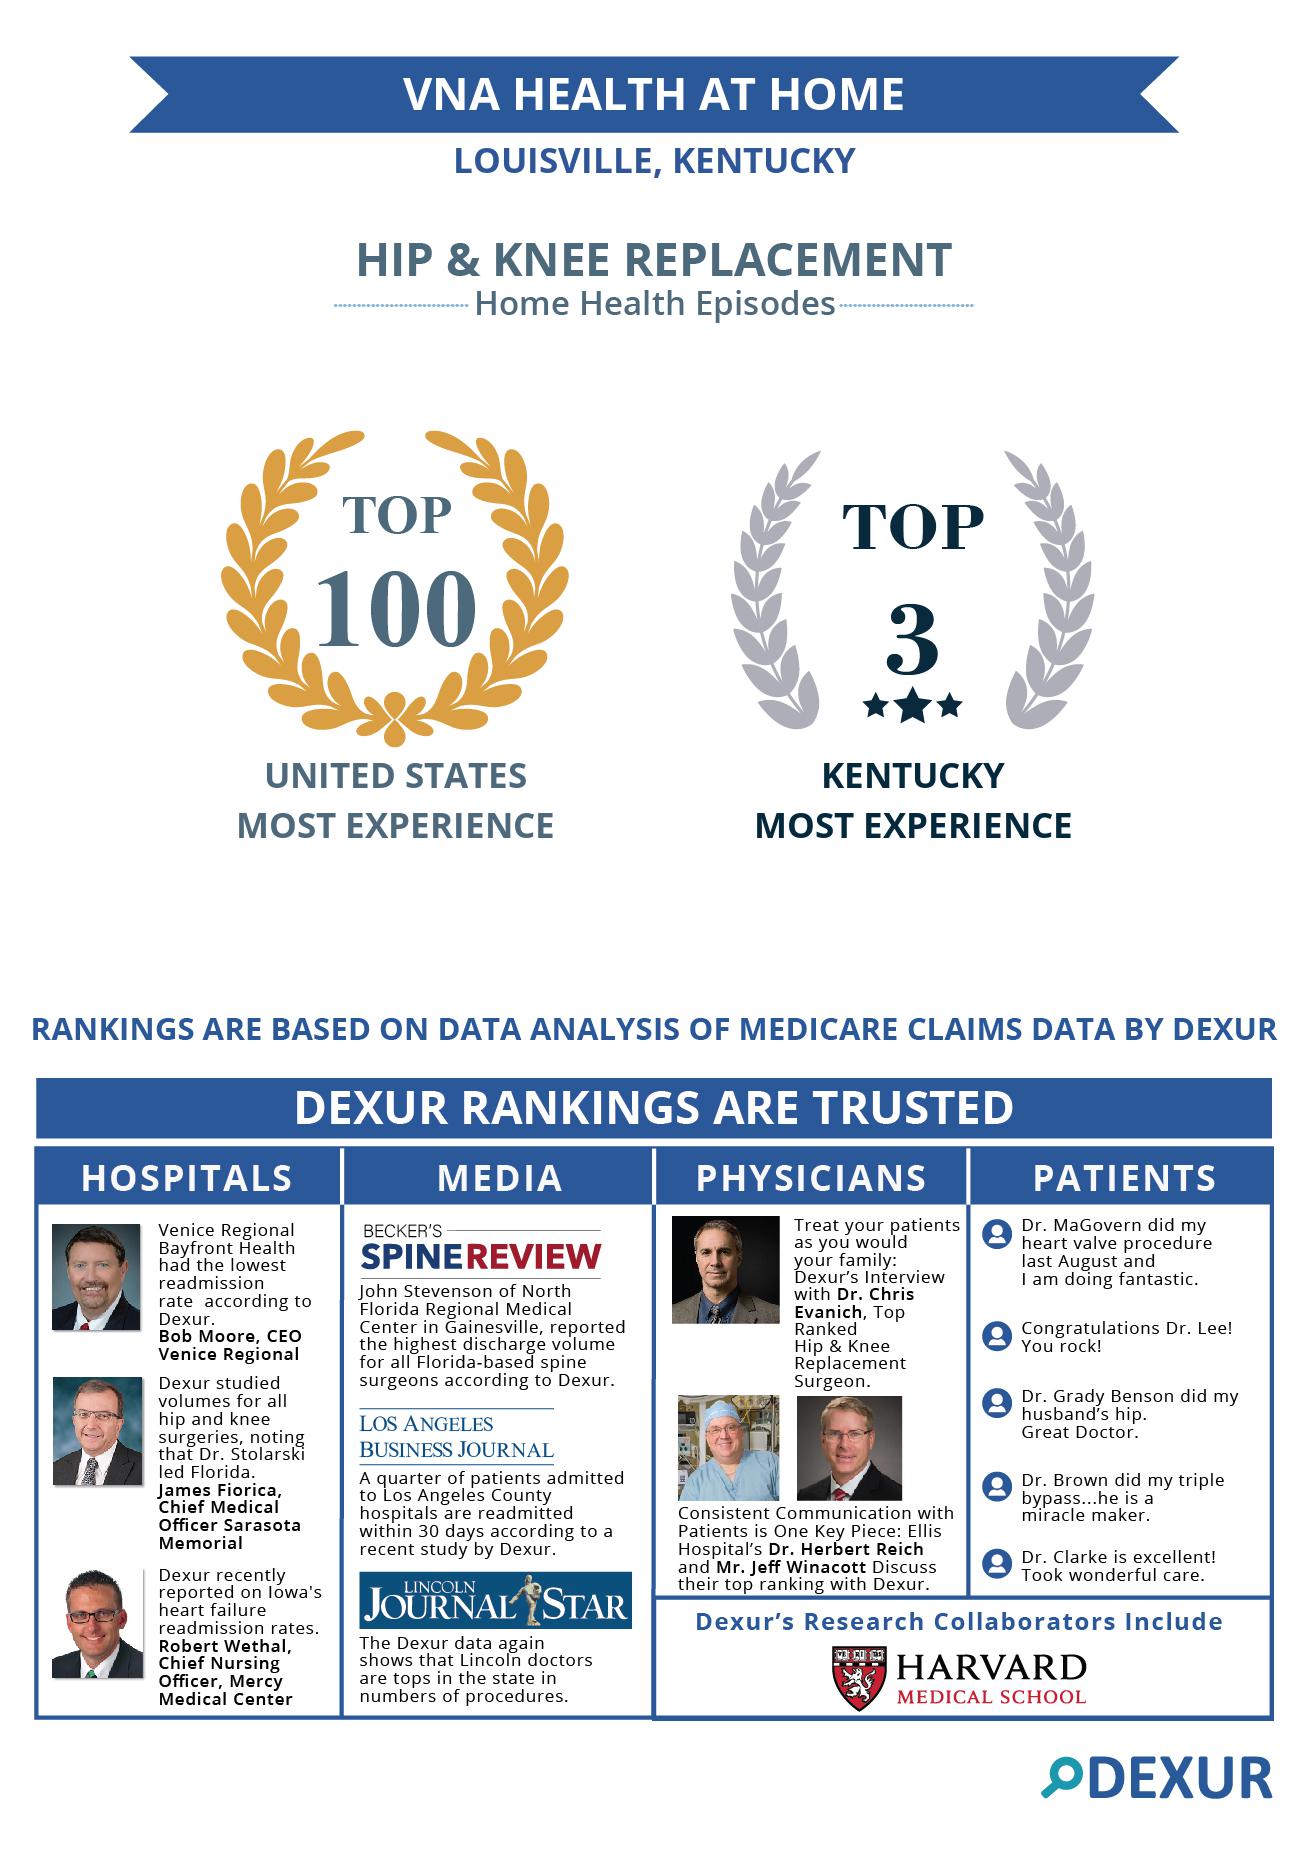 Vna Health At Home Louisville Ky Is Among The Most Experienced Home Health Agencies In Handling Hip Knee Replacement Patients In United States